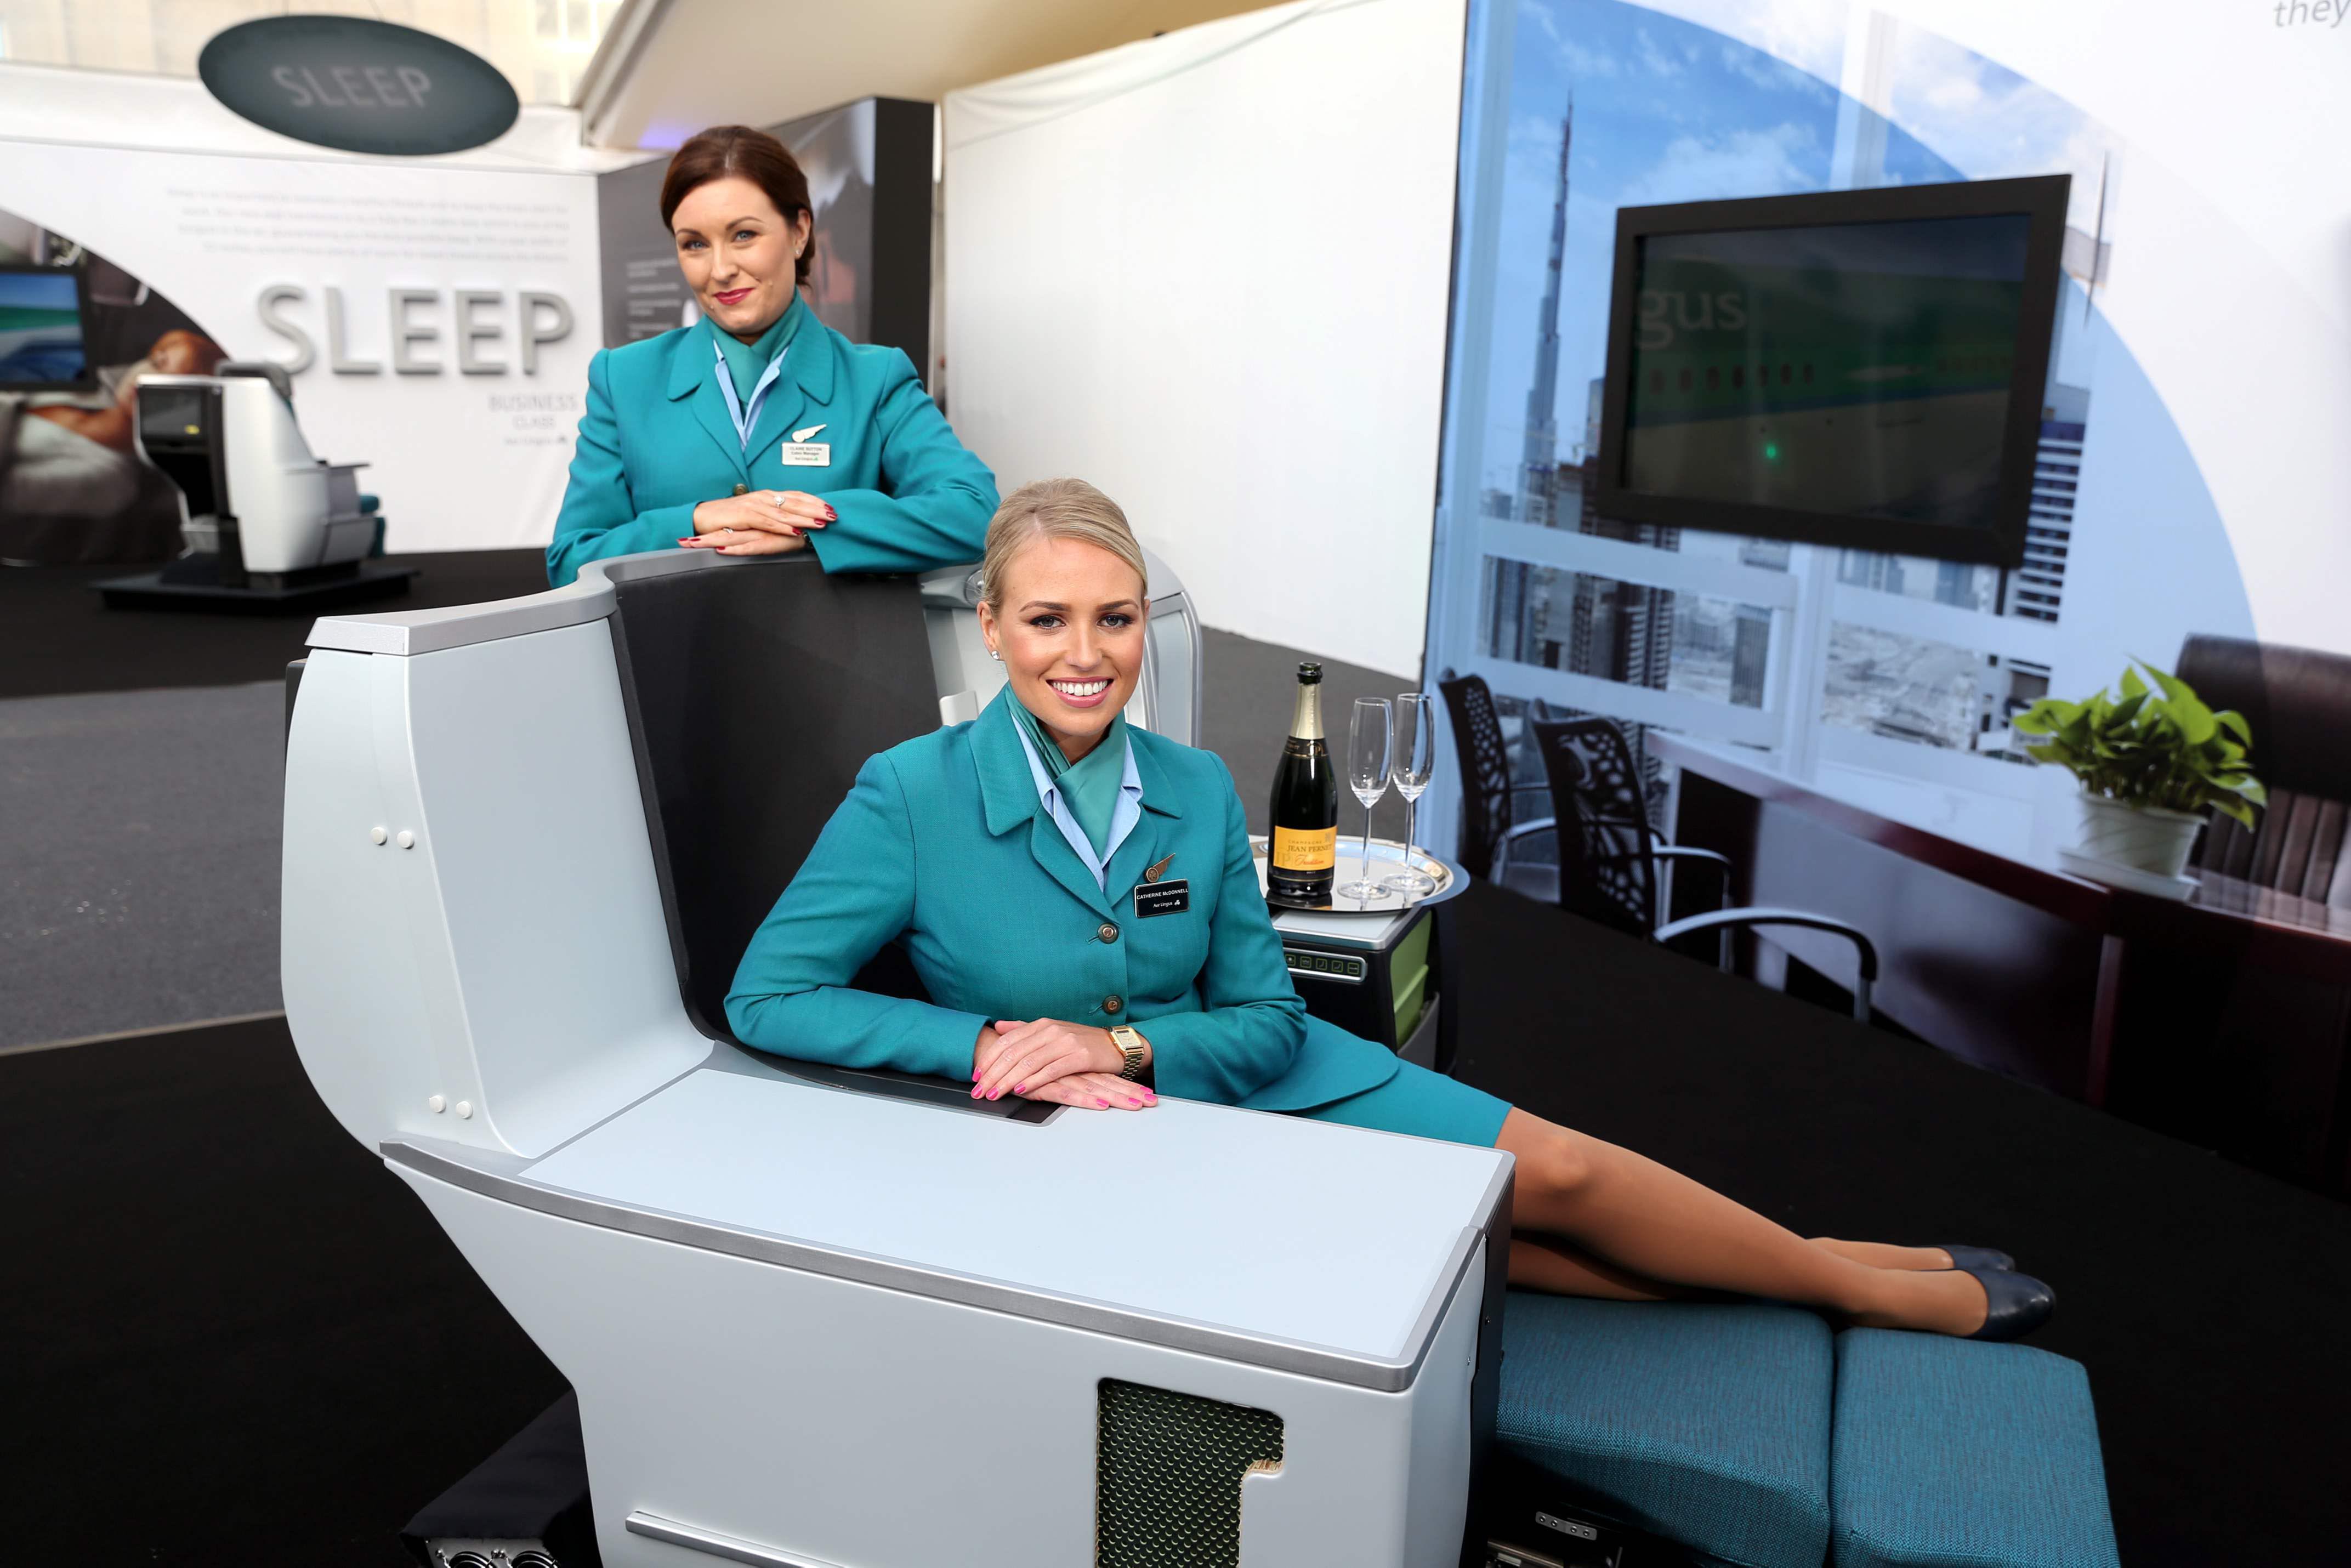 aer lingus airlines reviews